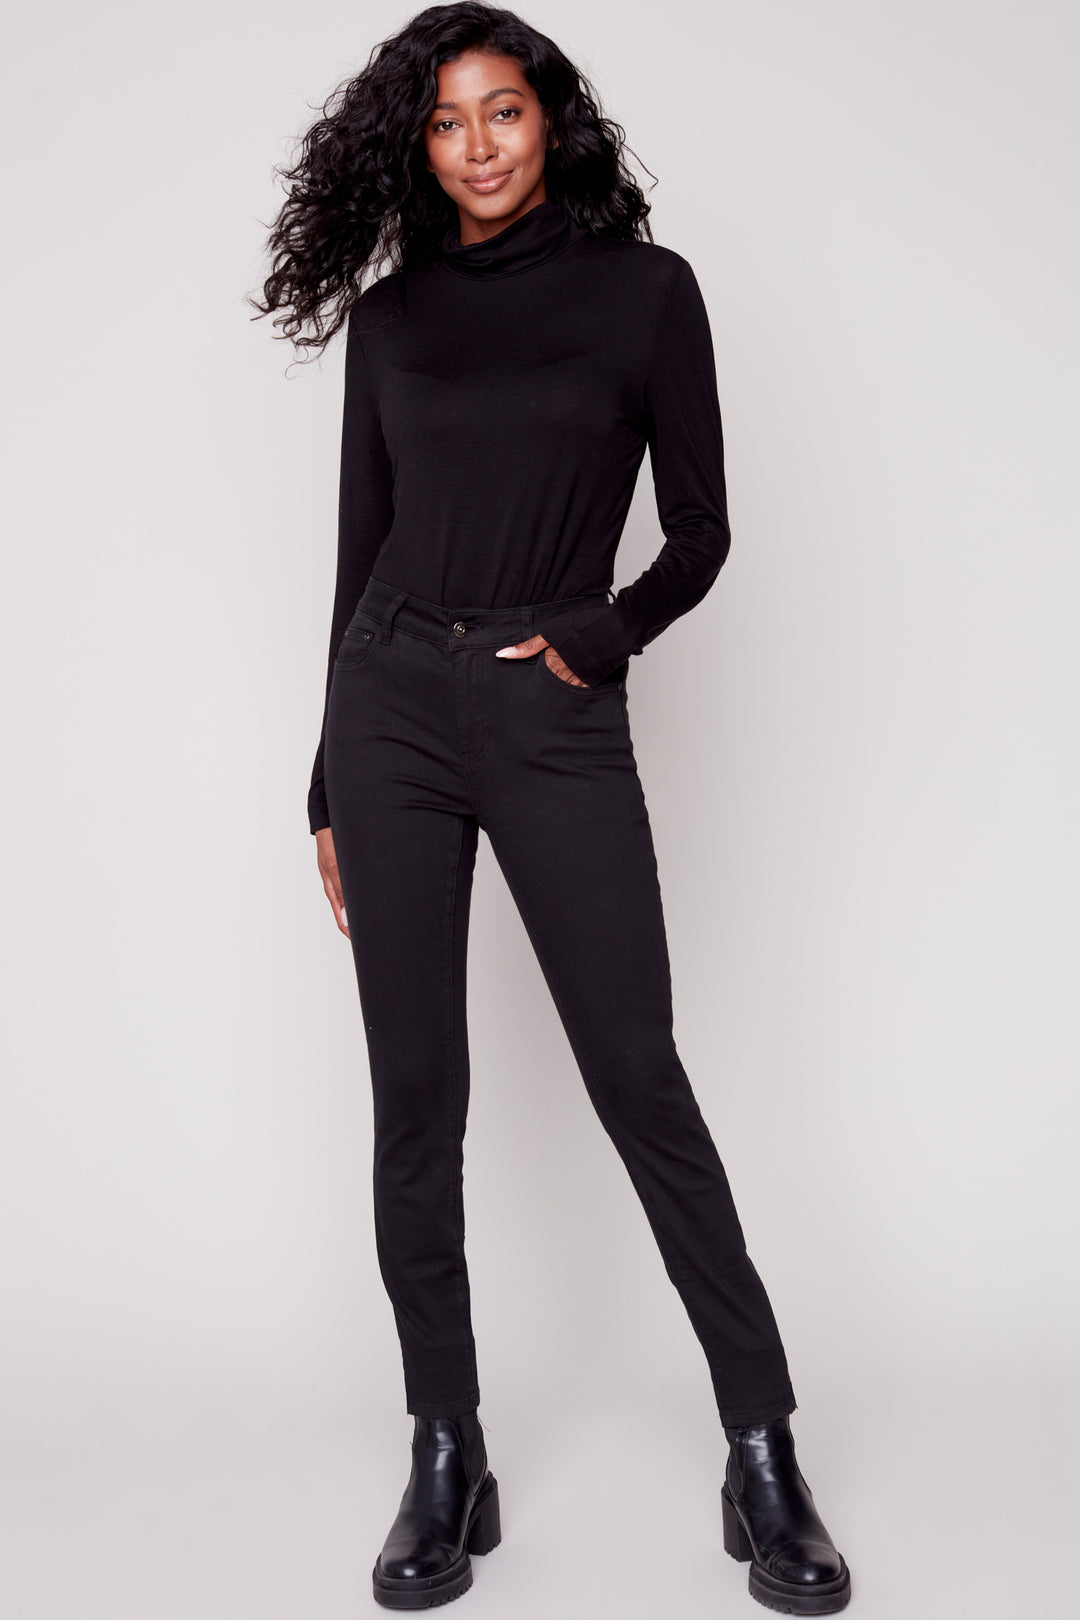 Take a risk and step out in style with these Zip Jean twill pants. Boasting a side zipper for fashionable detail, these timeless jeans are ready for any crowd. With classic 5 pocket design and a stylish side hem zipper, you'll be sure to stand out!